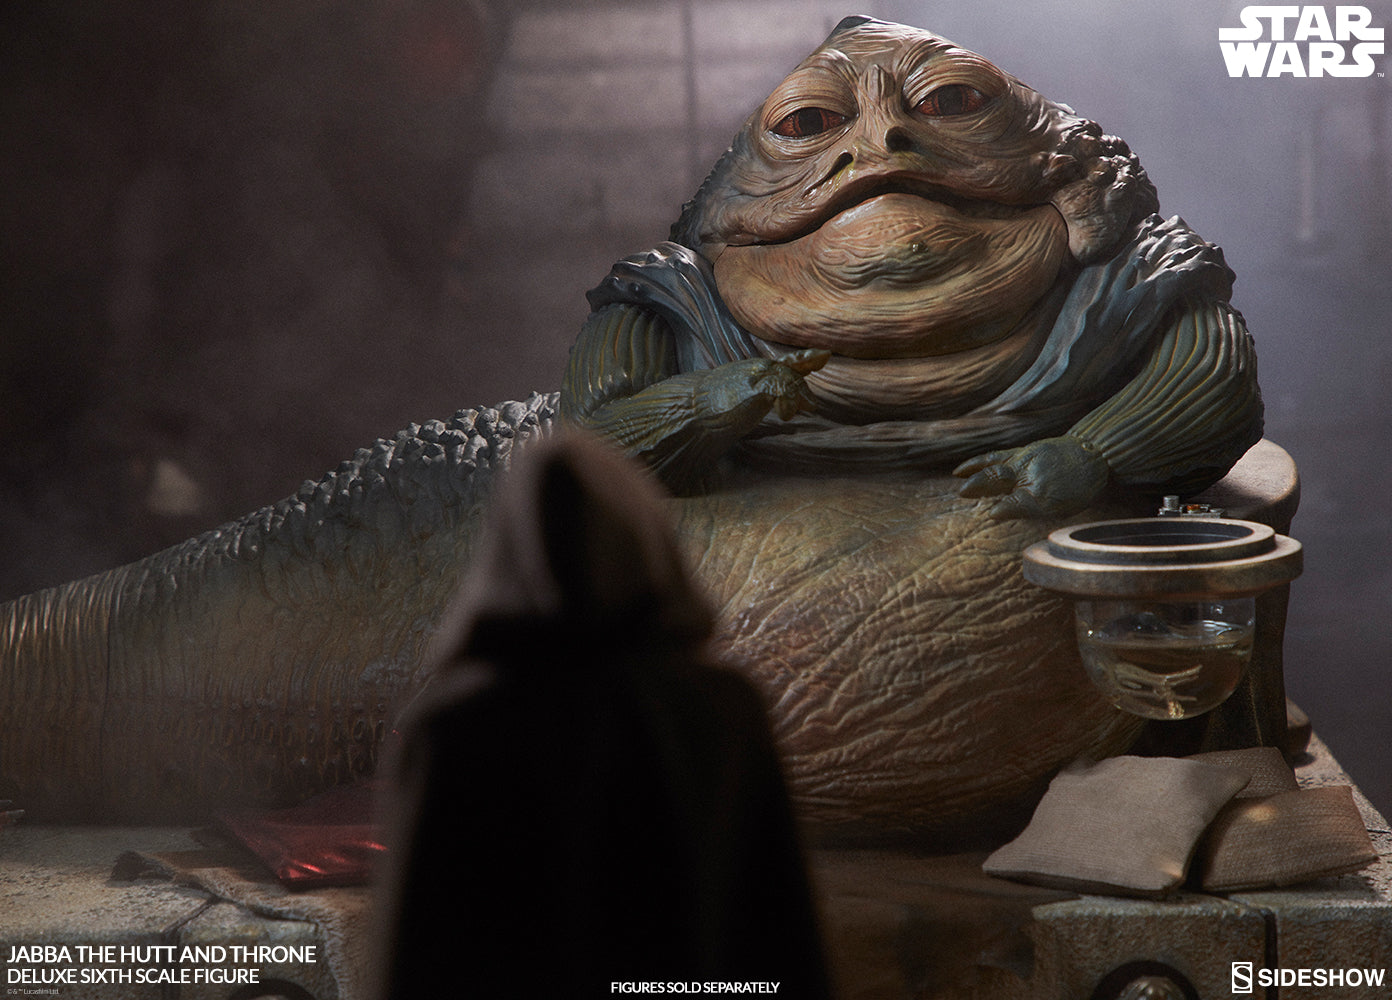 Sideshow Collectibles - Star Wars: Return of the Jedi - Jabba the Hutt and Throne Deluxe Sixth Scale Figure Set